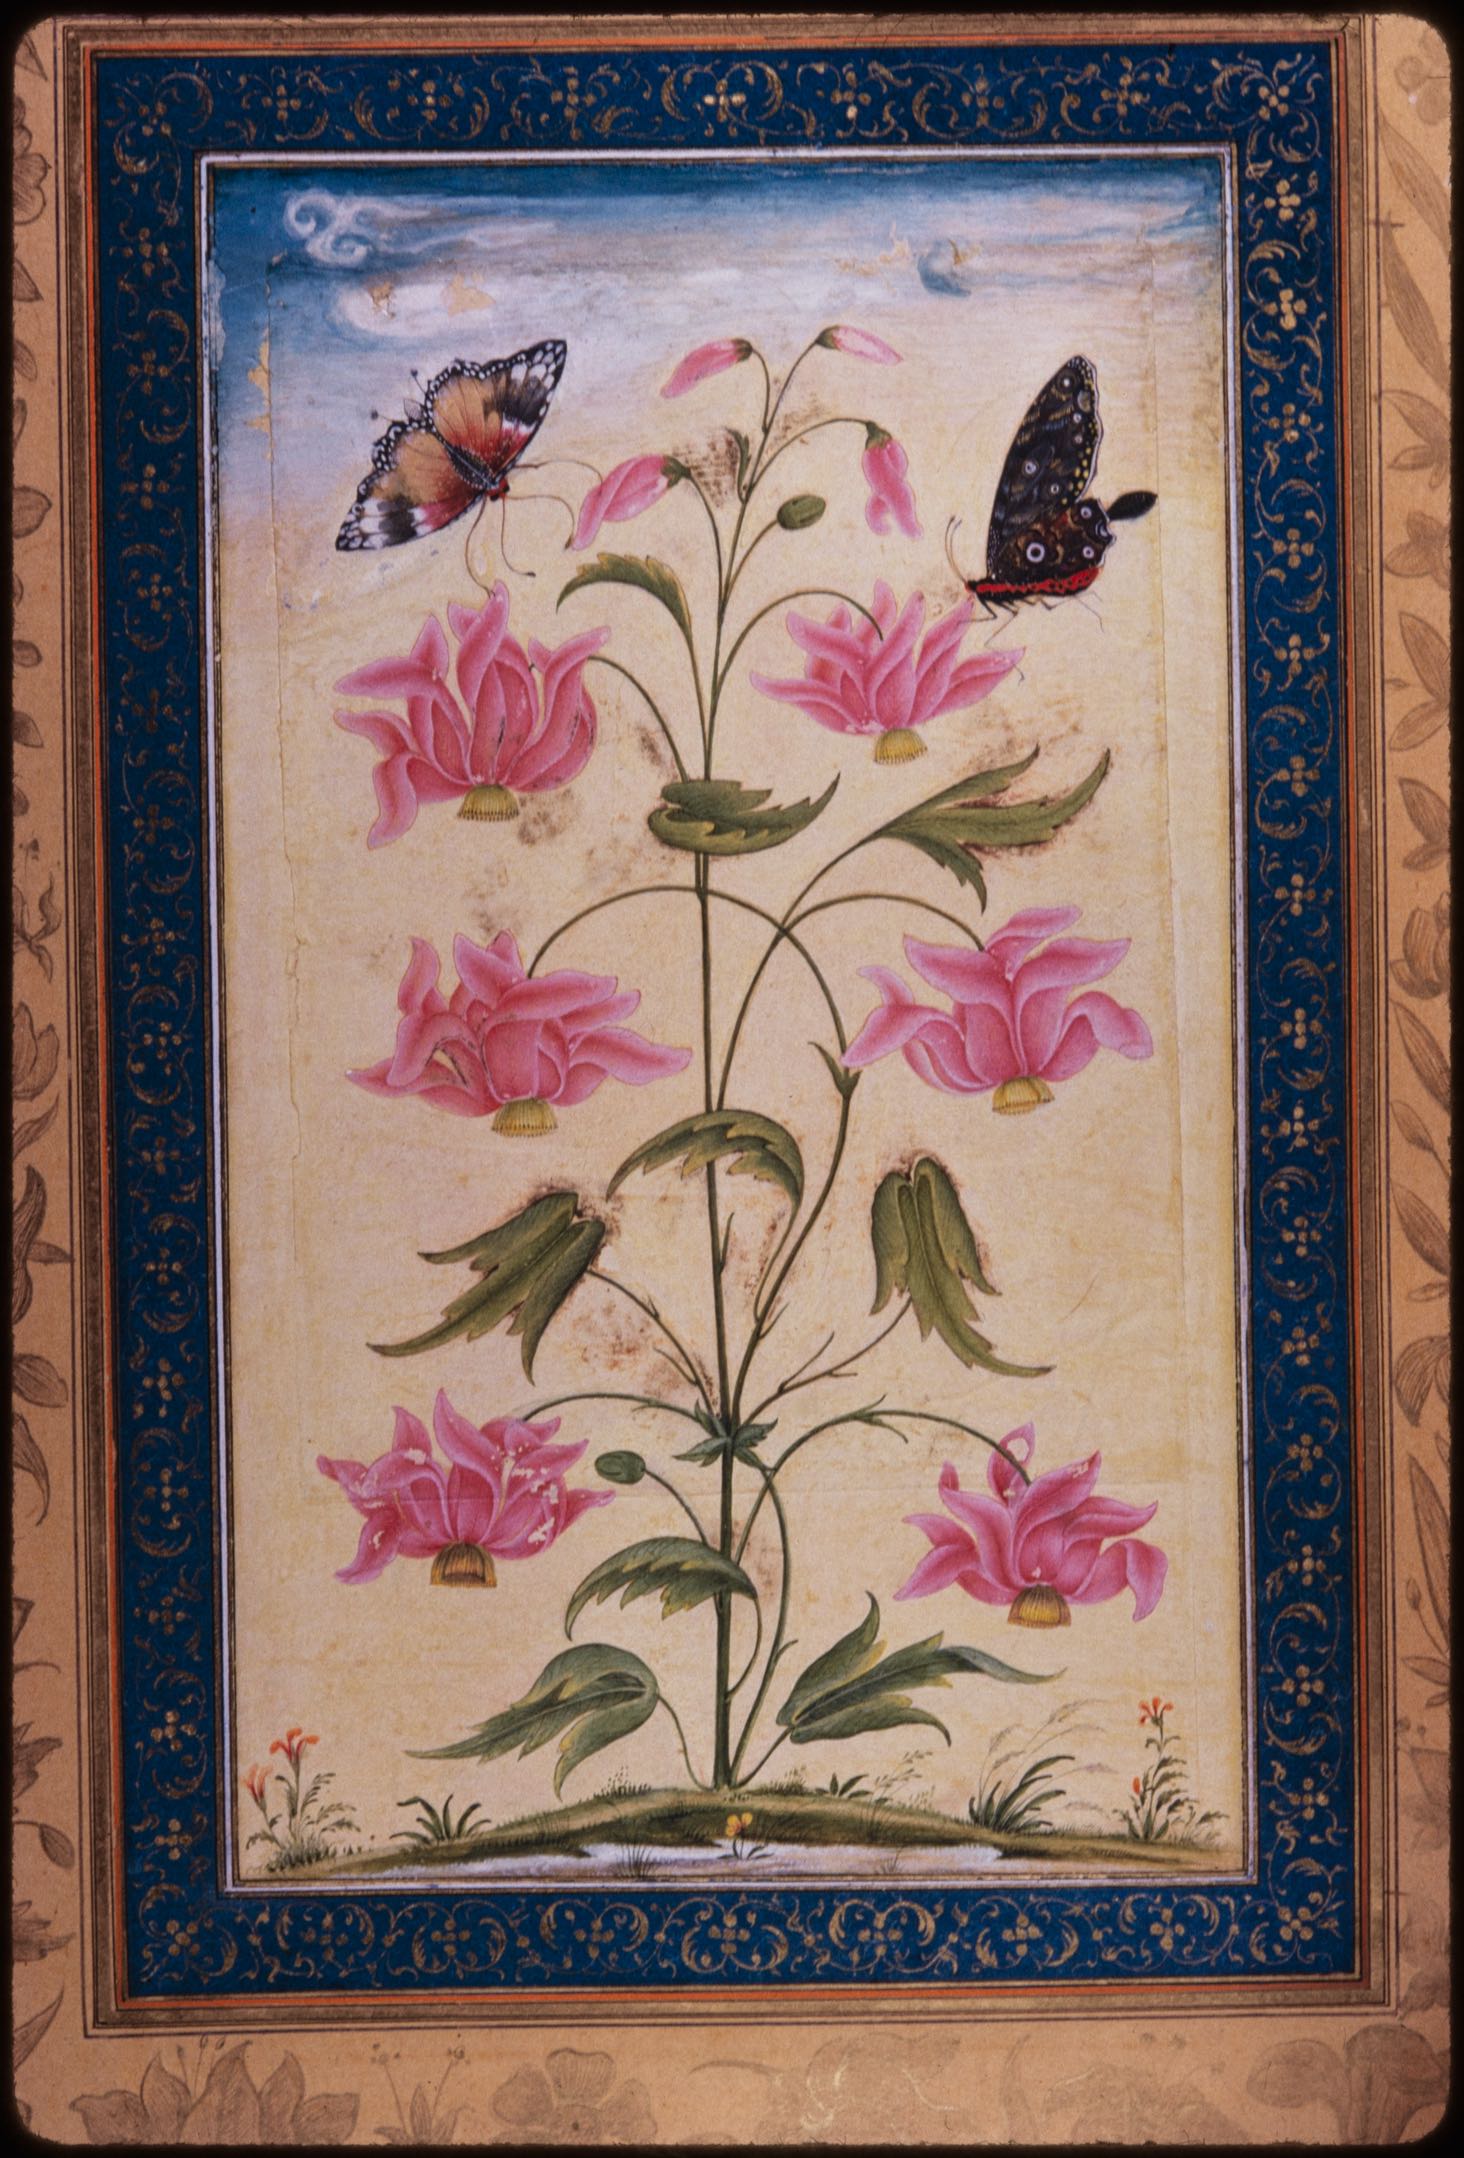 Butterflies alighting on an exotic plant, f. 64 from the Dara Shikoh Album (British Library Add. Or. 3129)